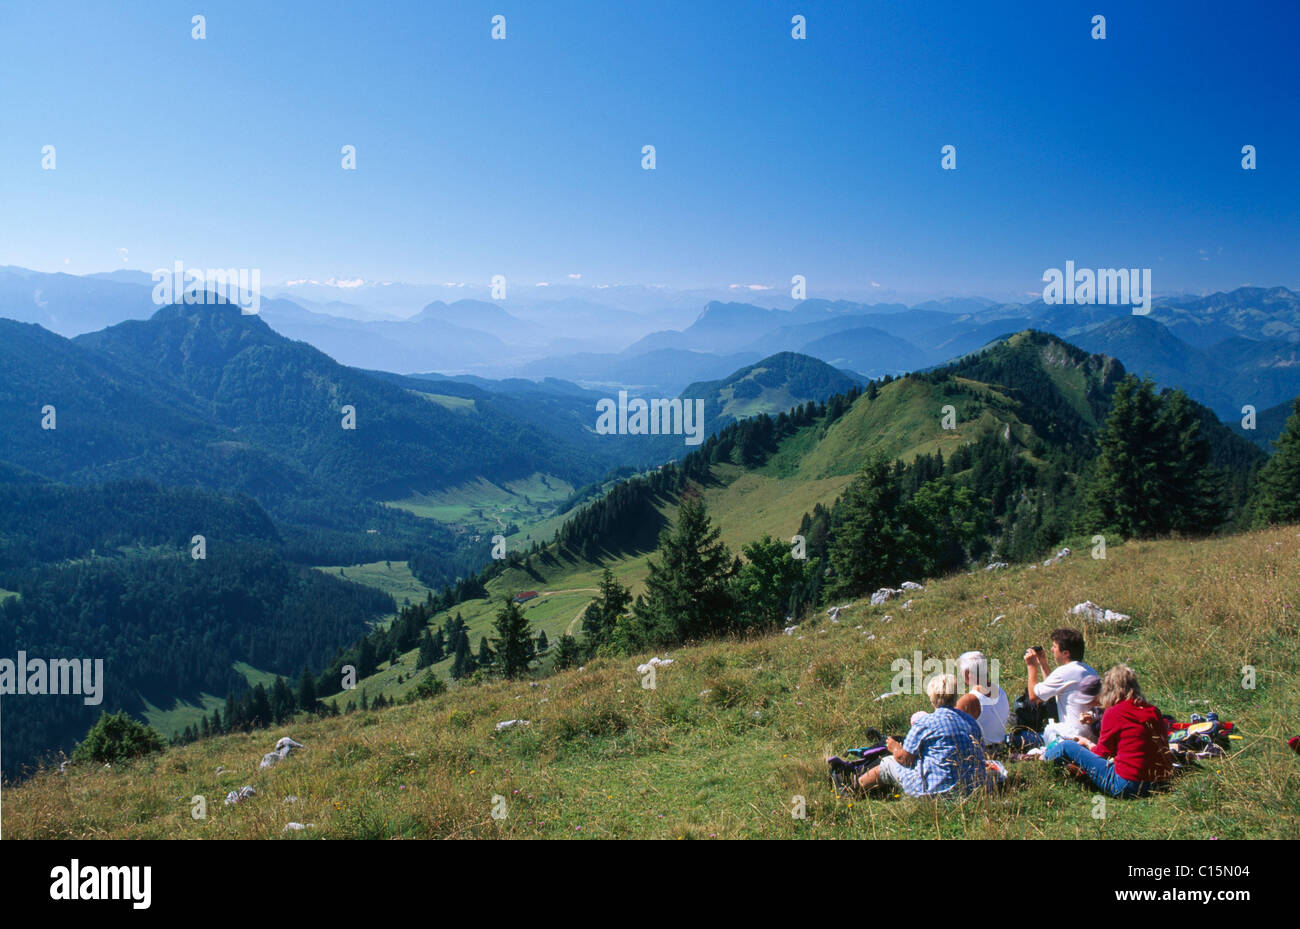 Hikers taking a rest, Mt. Hochries, Chiemgau, Bavaria, Germany, Europe Stock Photo